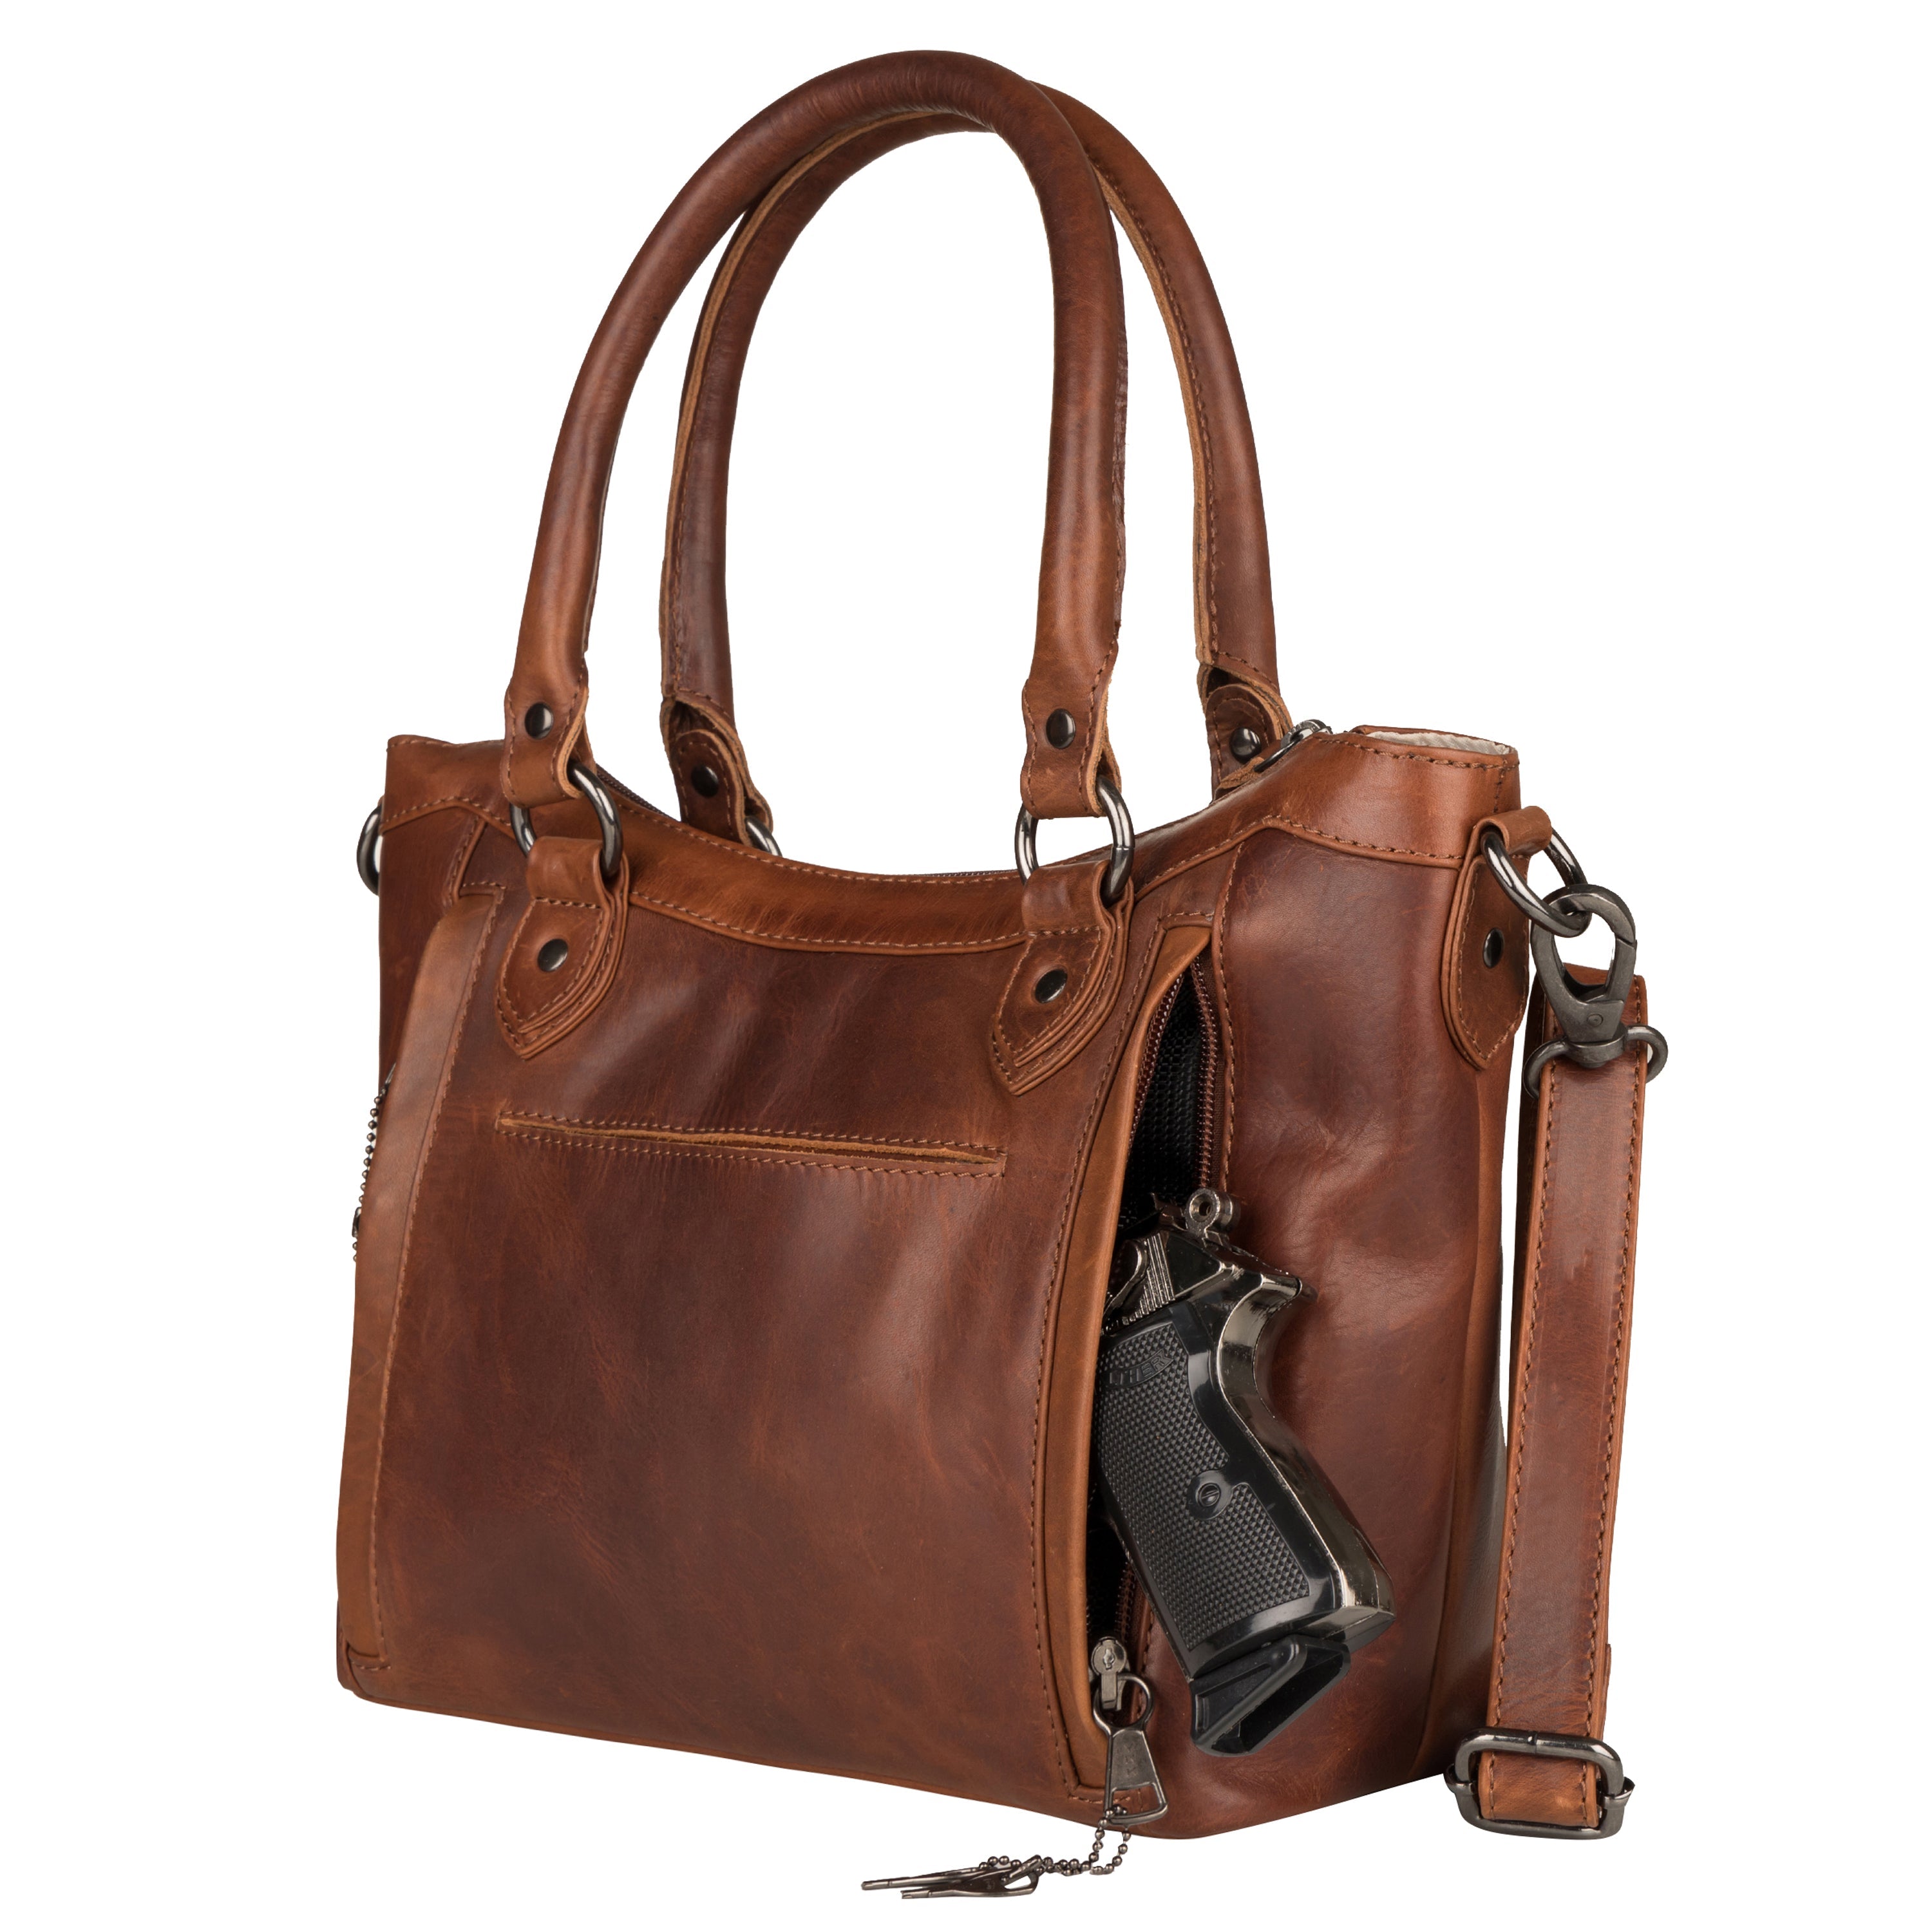 Concealed Carry Sadie Leather Satchel by Lady Conceal - Lady Conceal - designer purses - black designer purse - designer purse brands - designer backpack purse - designer purse sale - womens designer purse sale - designer purses black friday sale - black and white designer purse - black crossbody purse designer - black owned purse designers - woman designer purse - designer purses for women